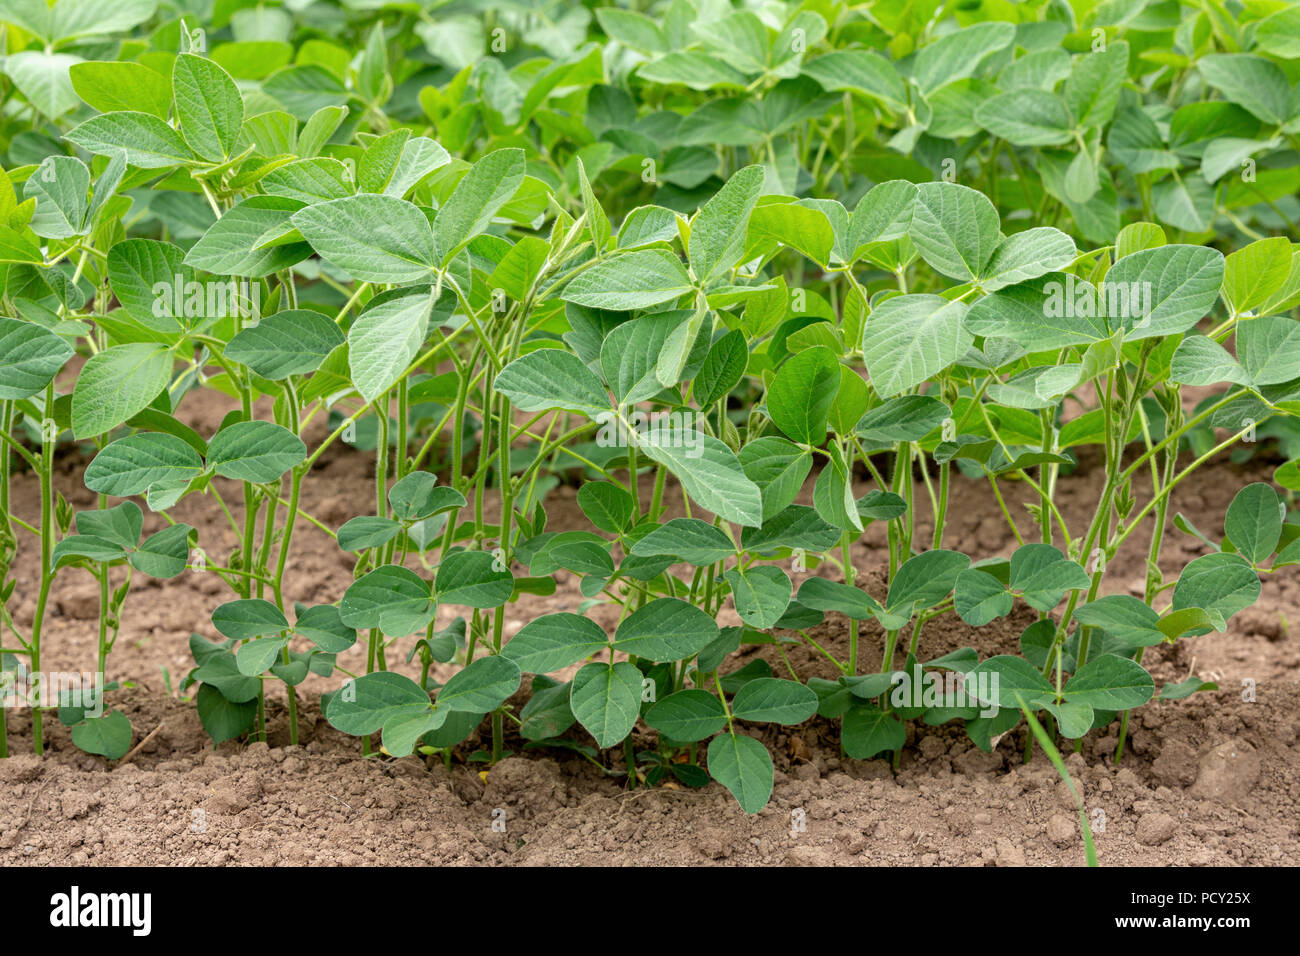 Detail of a field of mid-growth Soy or Soya - Glycine max - planted in rows. Stock Photo